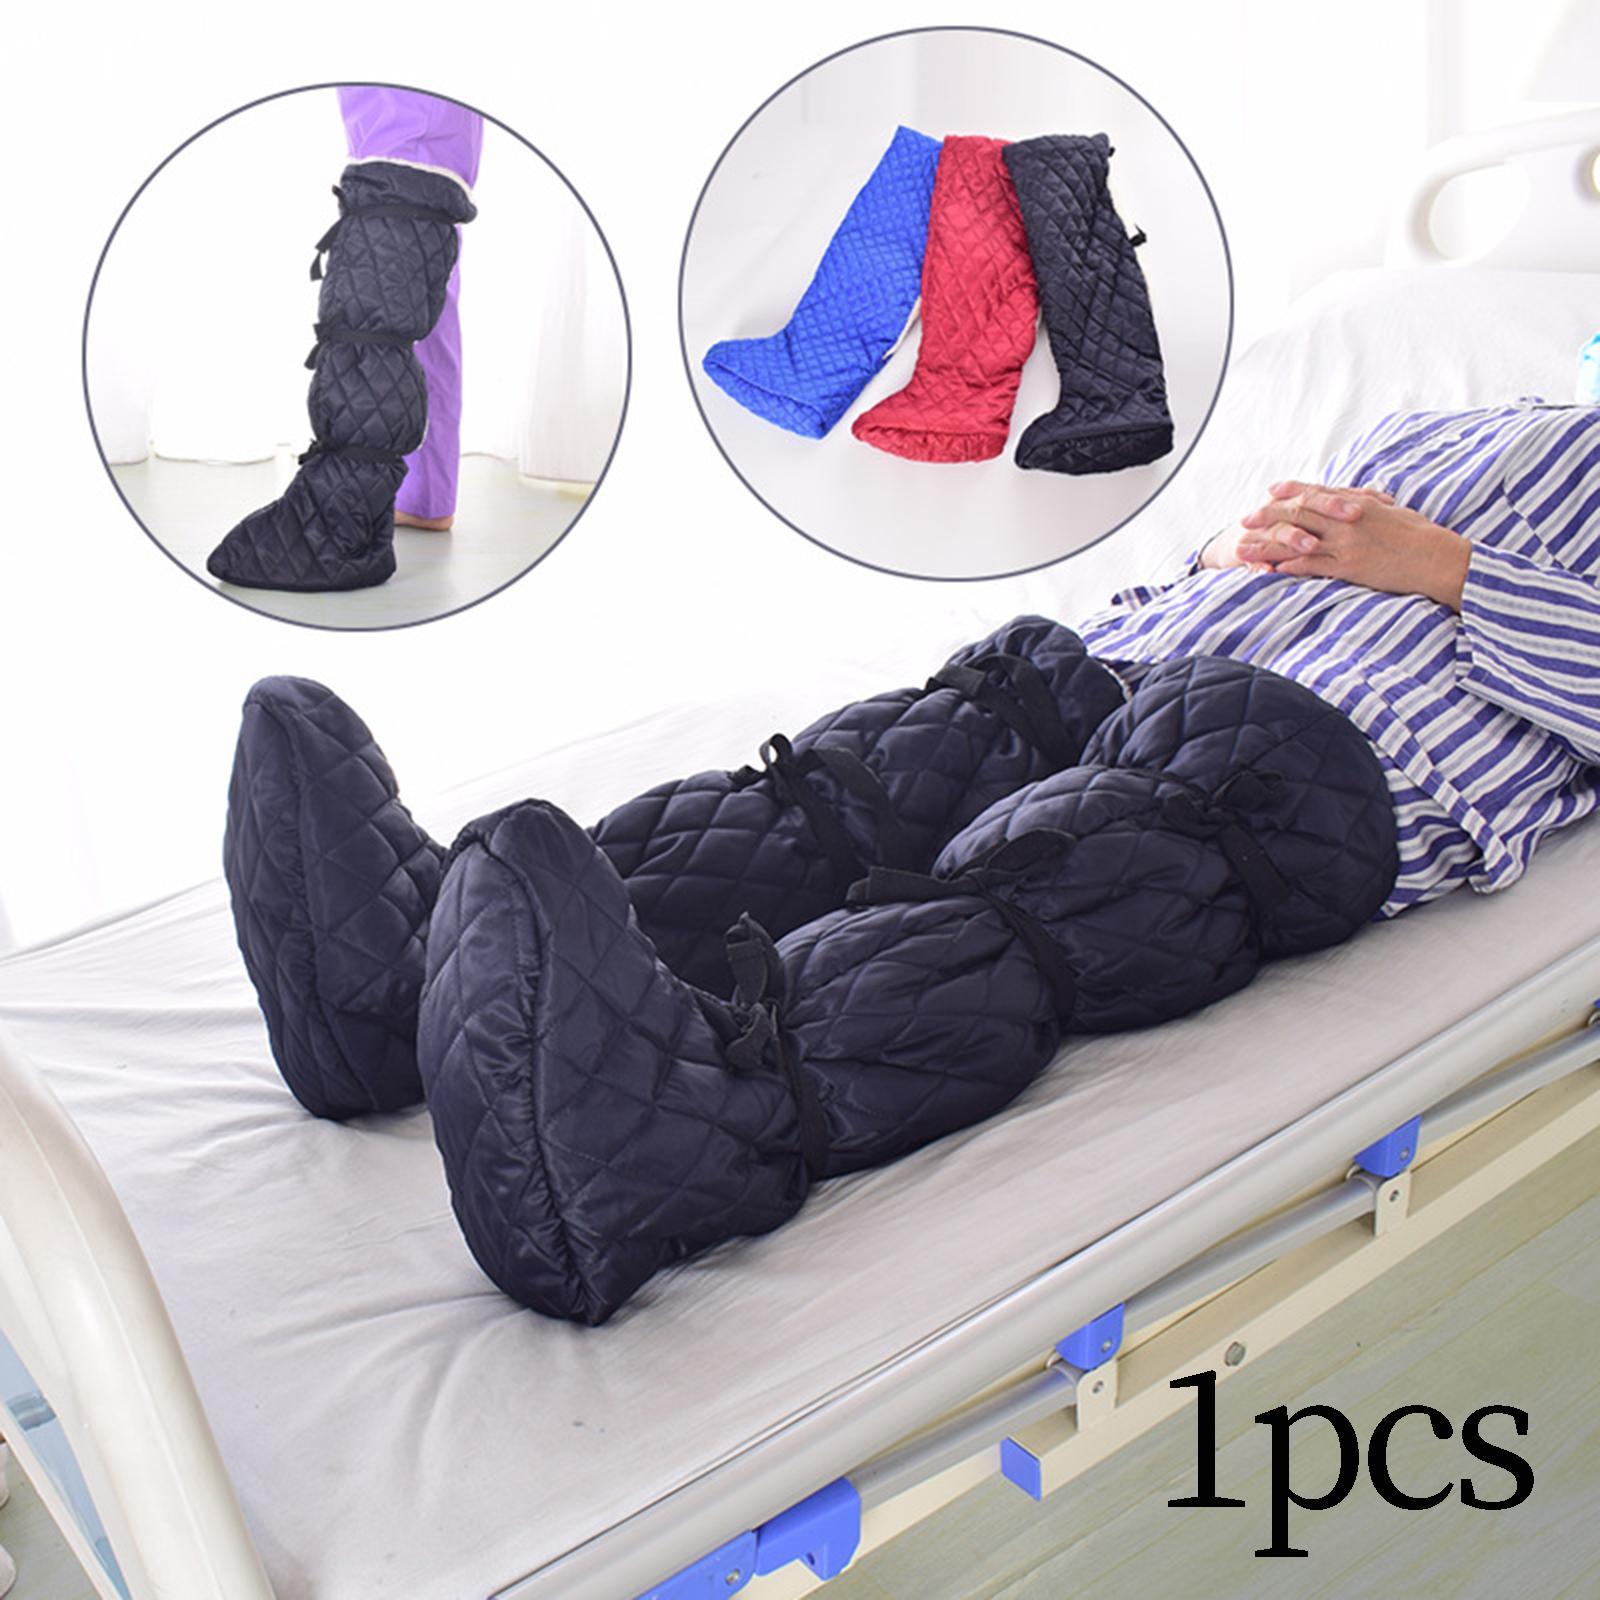 Plaster Warm Leg Cover Protective Soft Plush Thick Leg Foot Warmer Protector